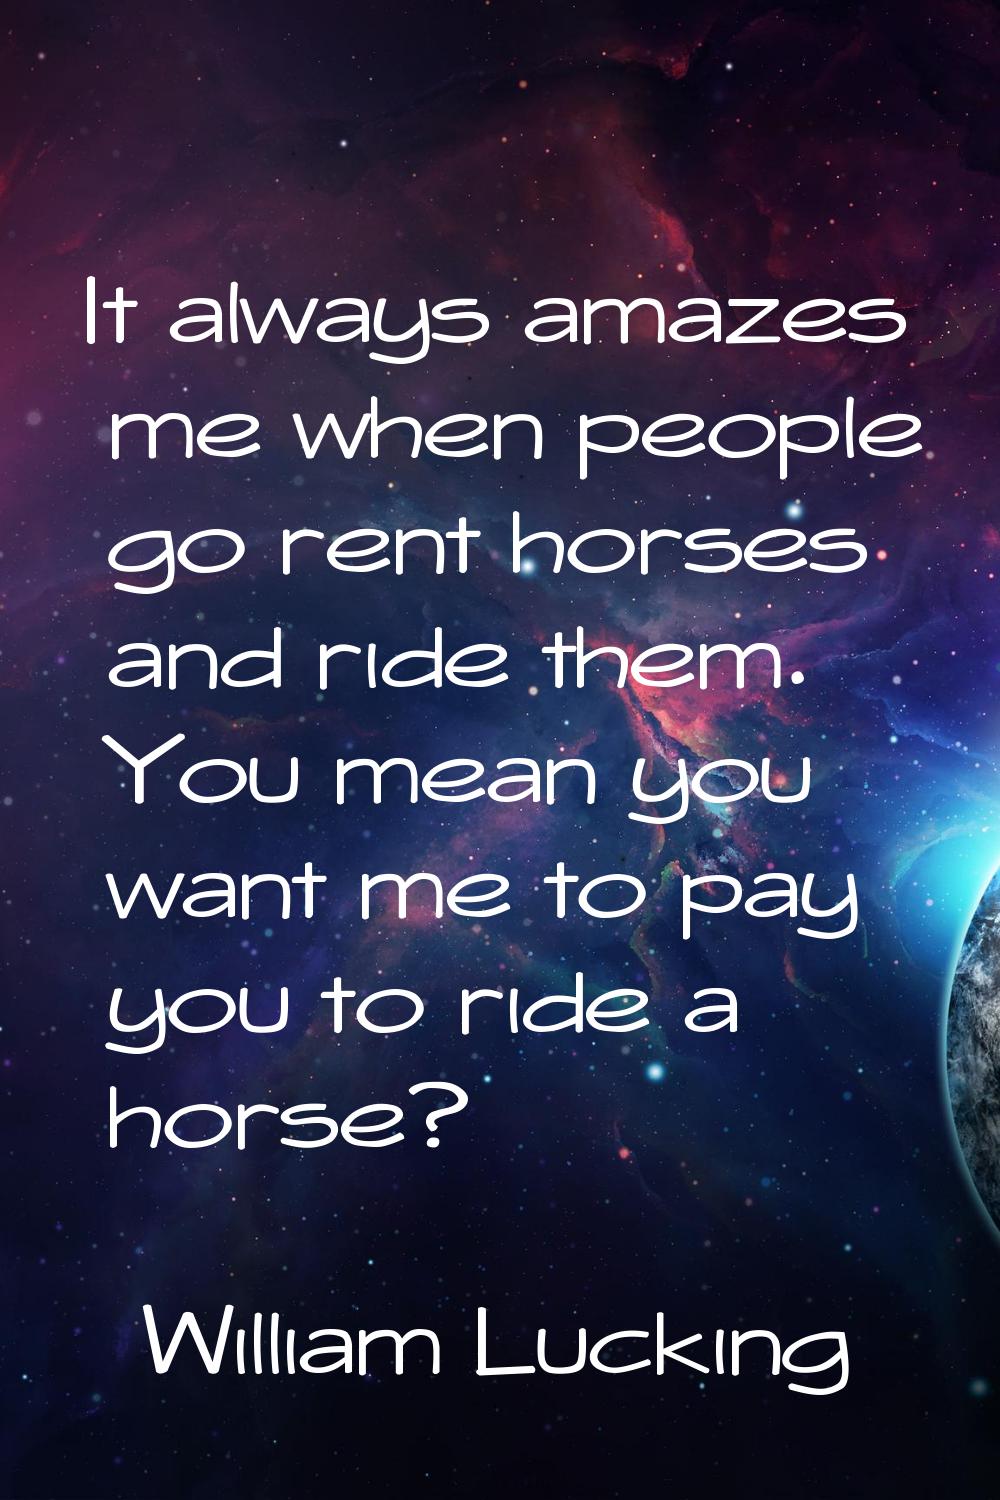 It always amazes me when people go rent horses and ride them. You mean you want me to pay you to ri